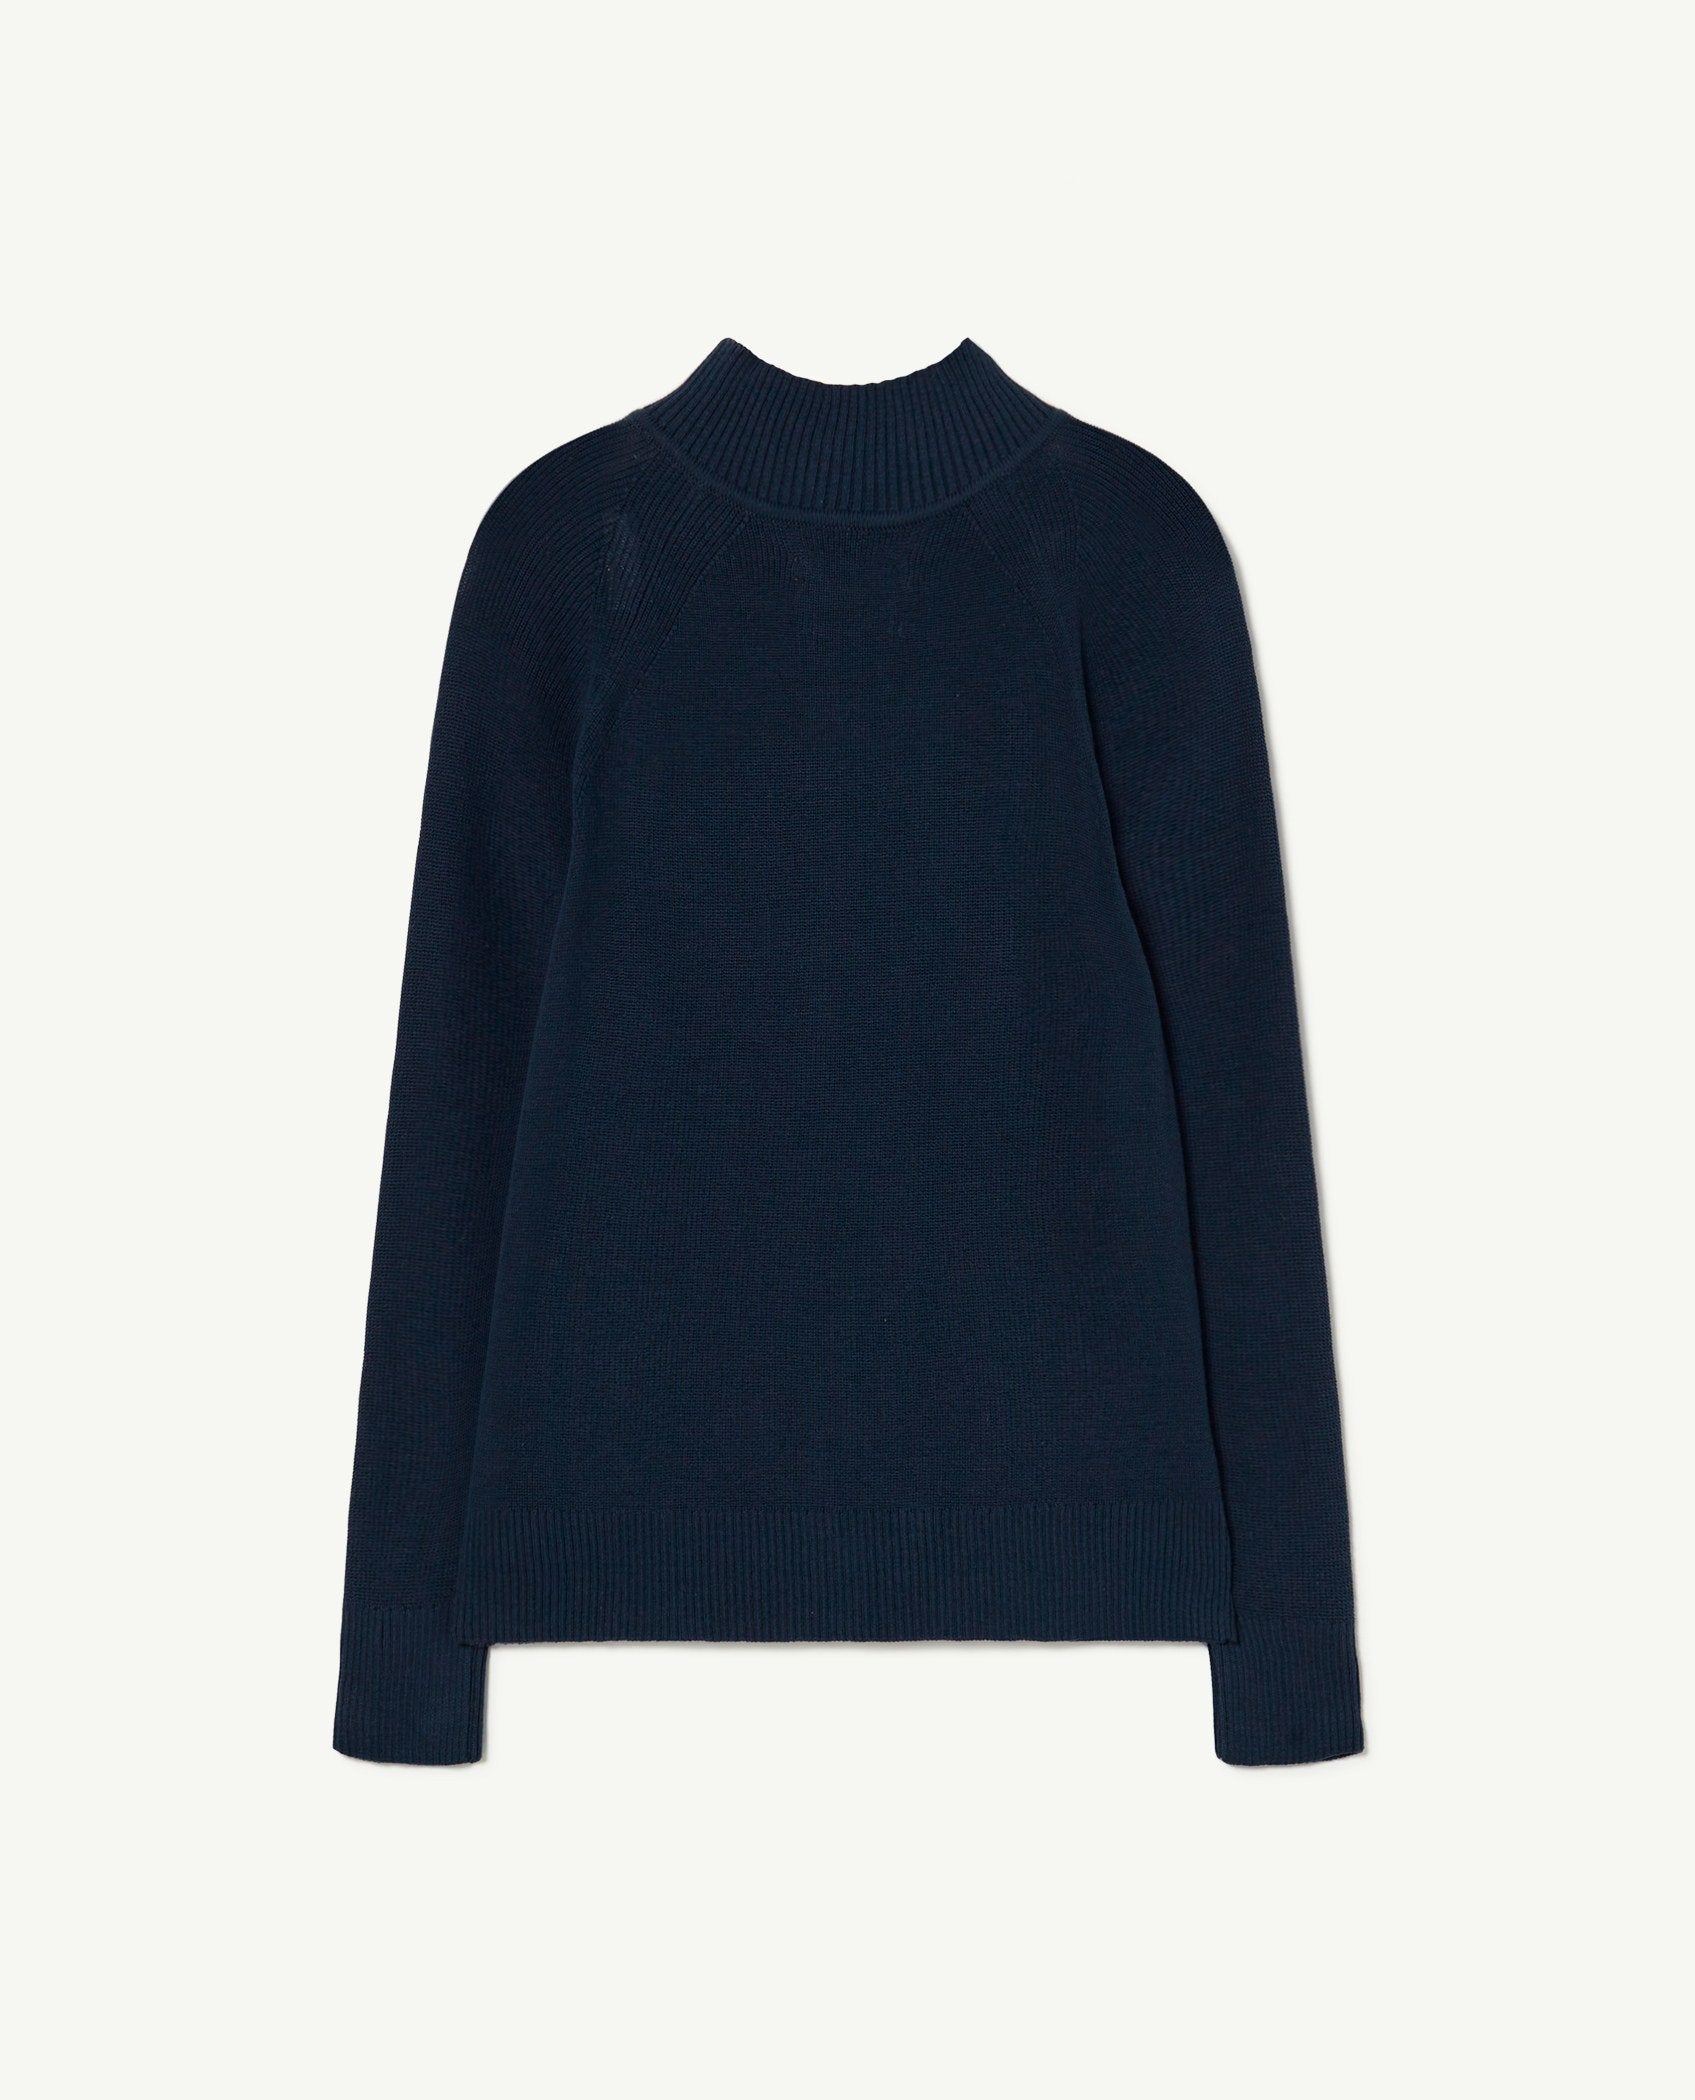 Navy The Animals Club Raven Sweater PRODUCT BACK